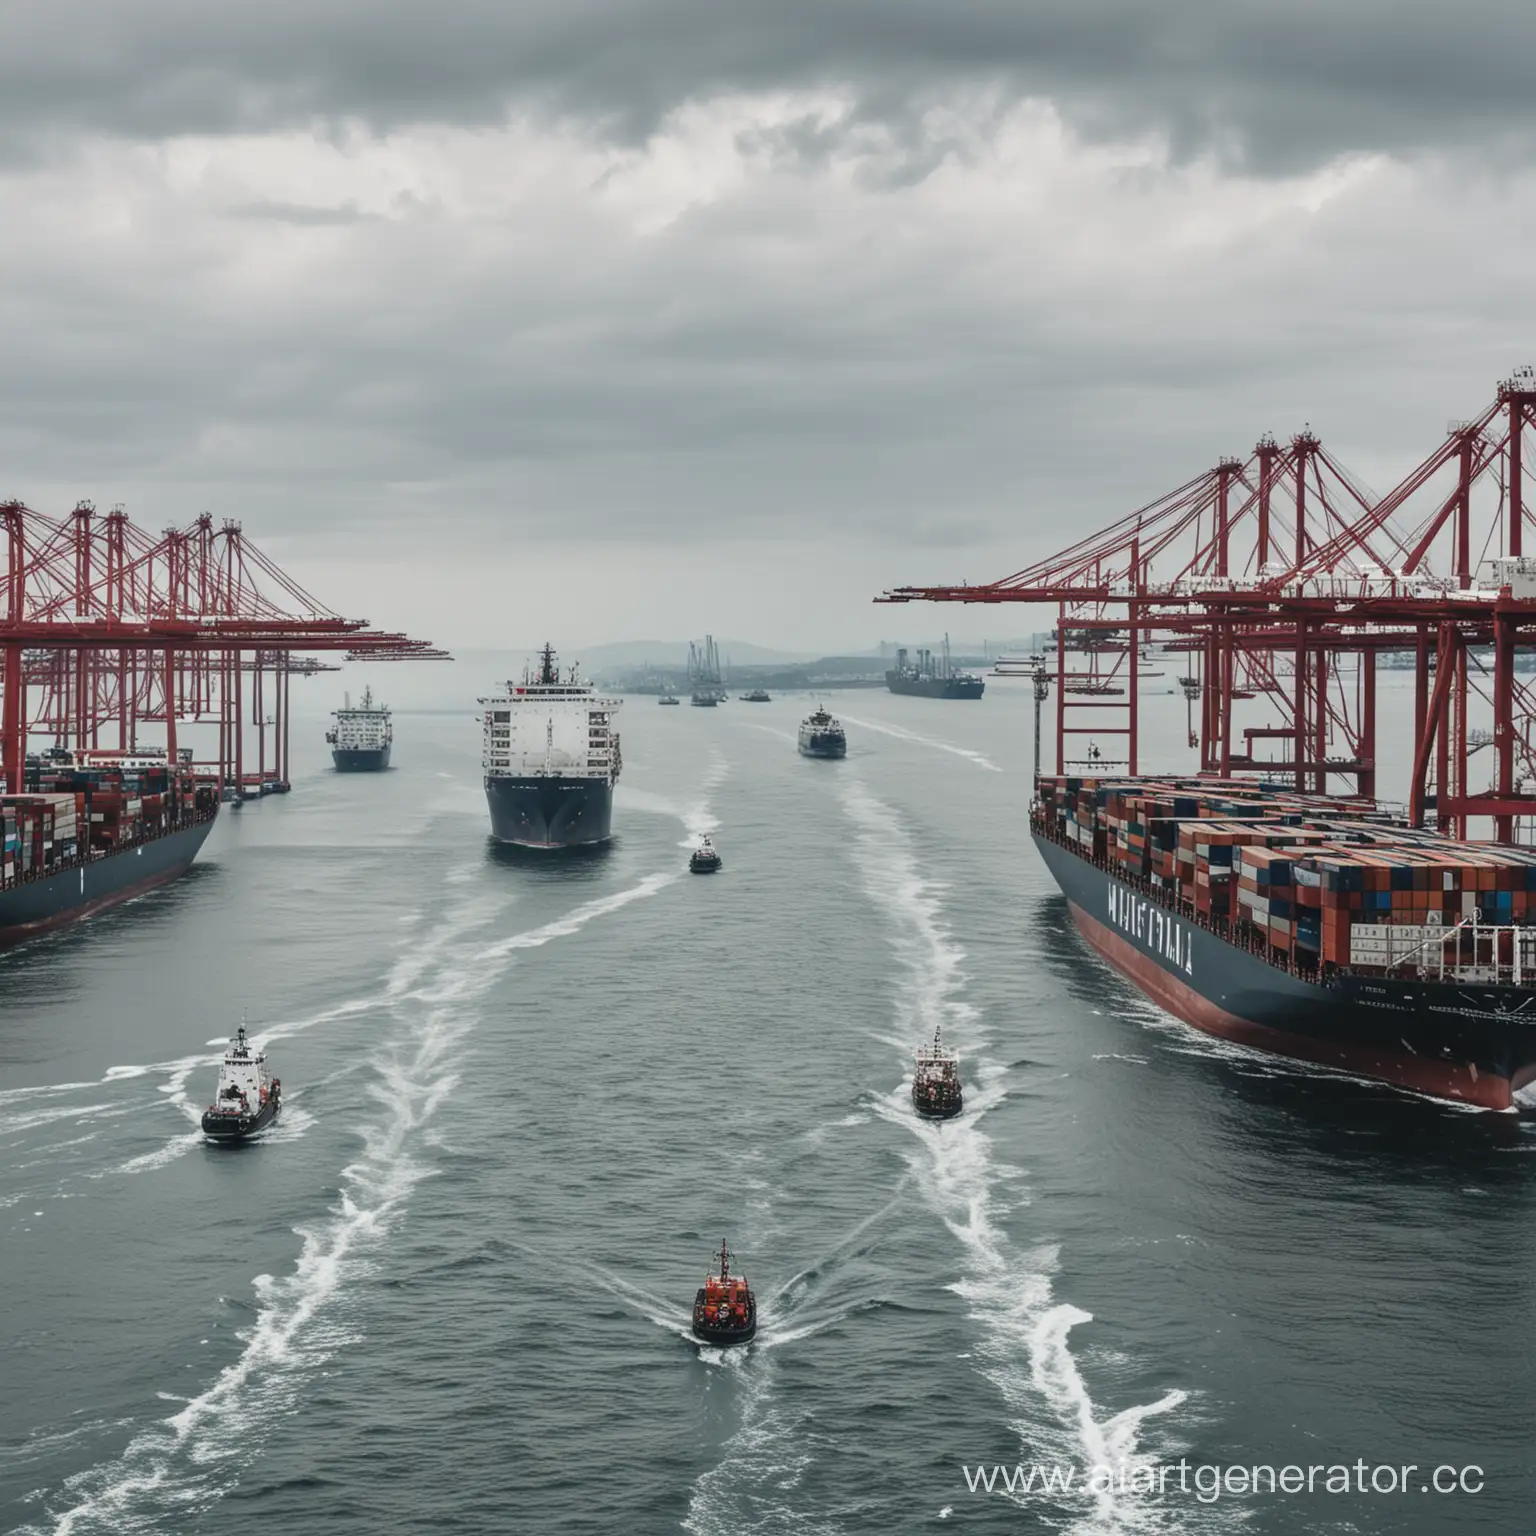 Navigating-Challenges-in-Maritime-Logistics-Ships-at-Sea-Amidst-Stormy-Weather